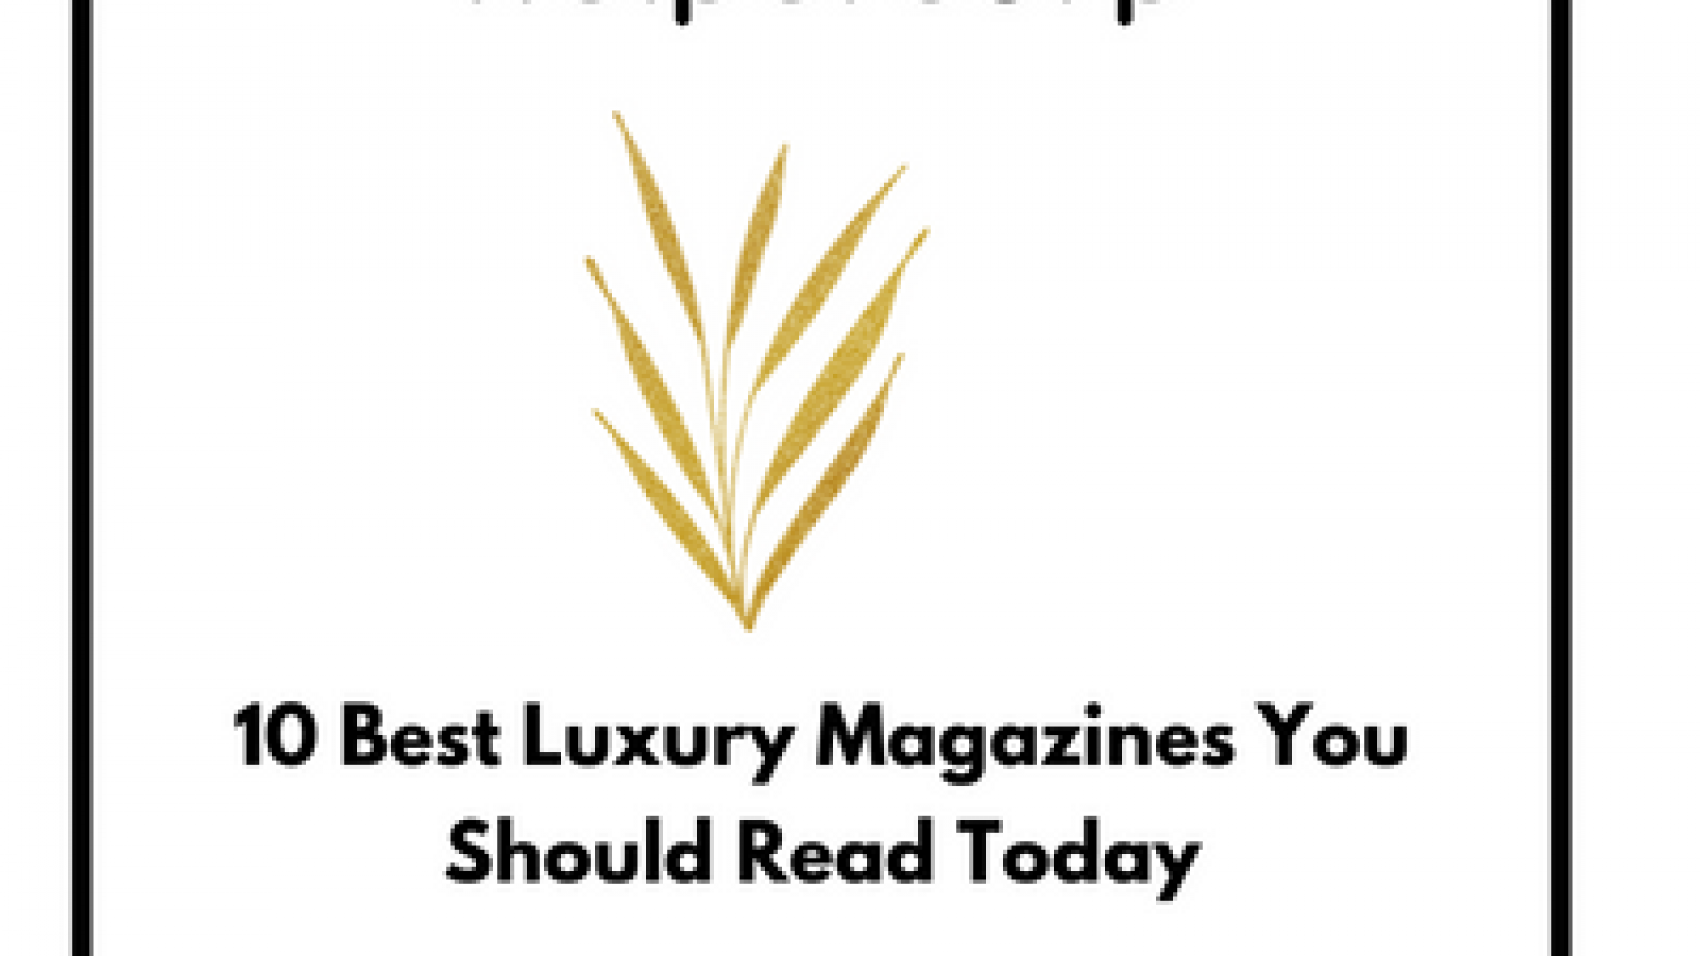 10 Best Luxury Magazines You Should Read Today